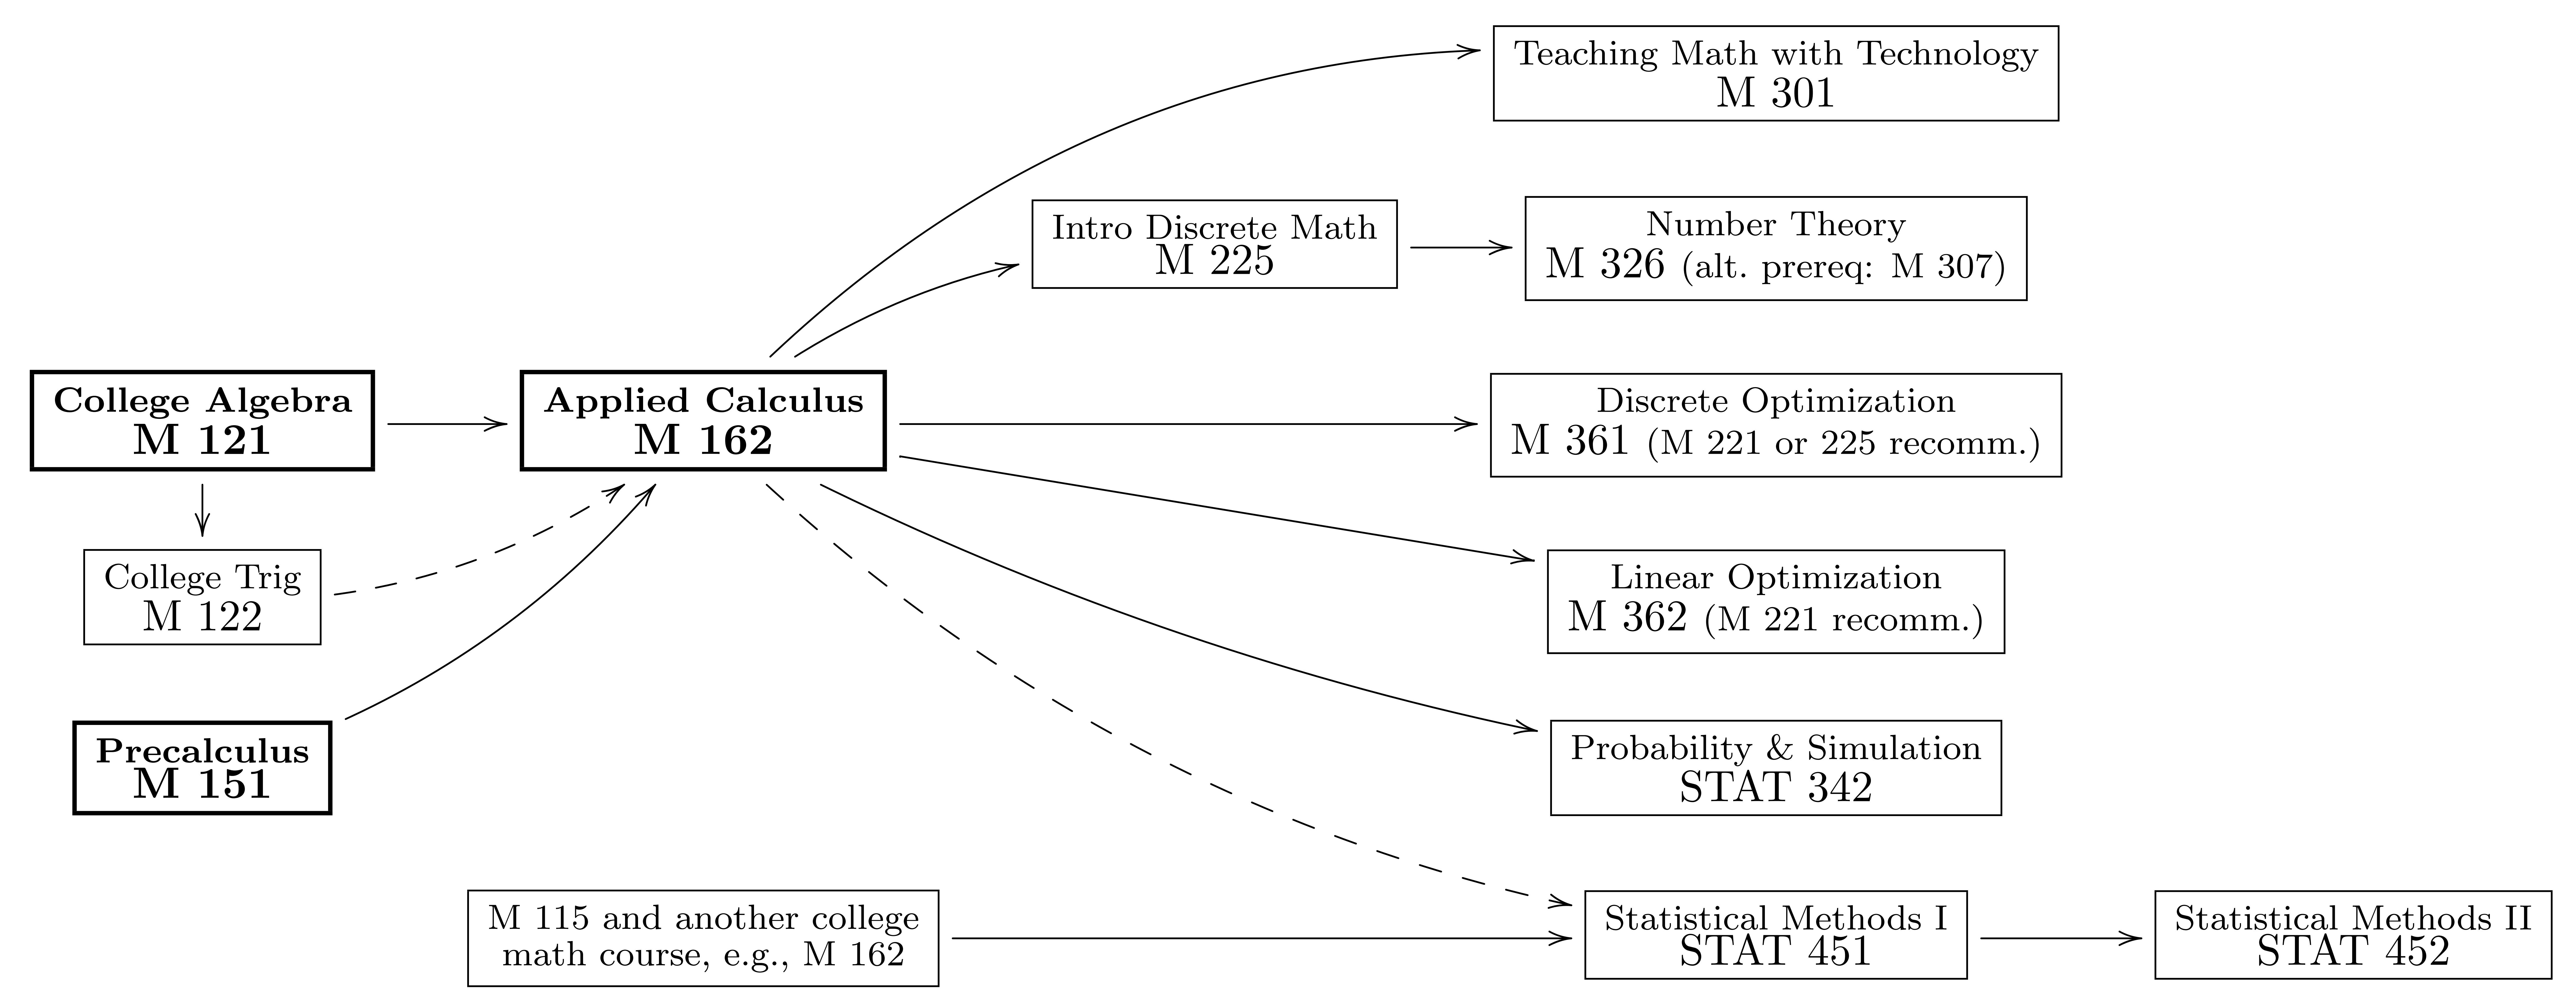 graphic showing the prerequisite relationships among courses based on applied calculus